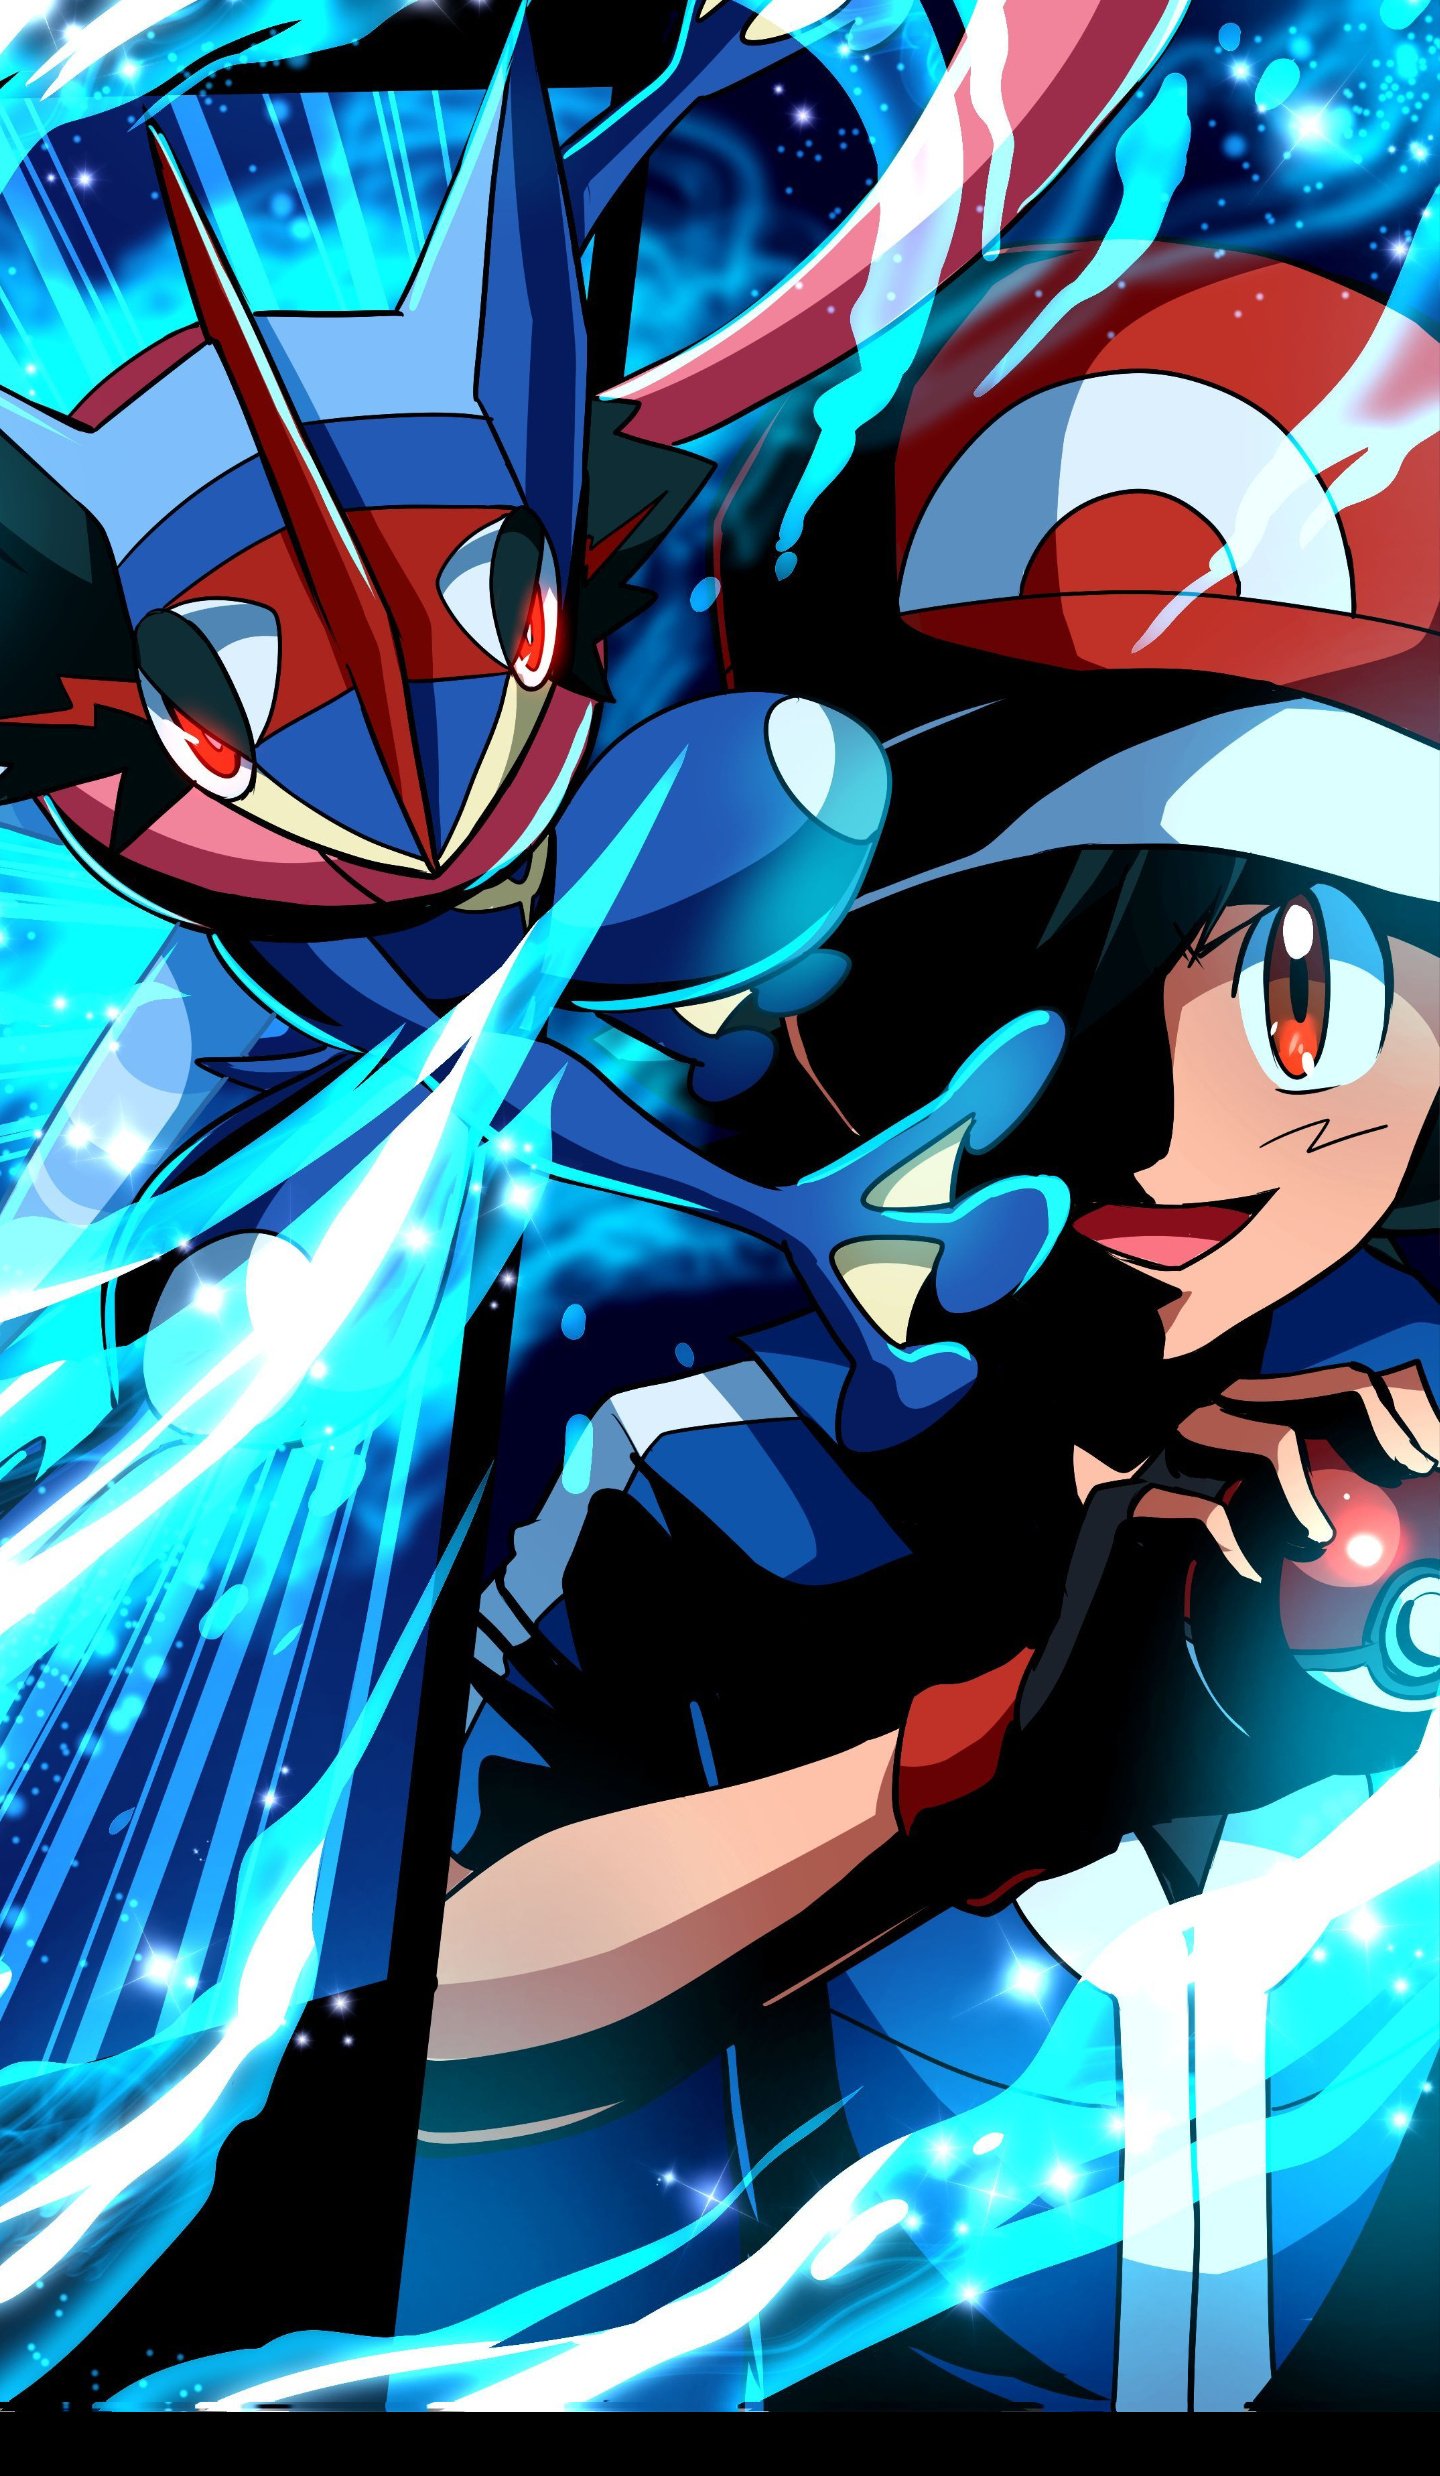 Cool Pokemon Wallpapers 67 images